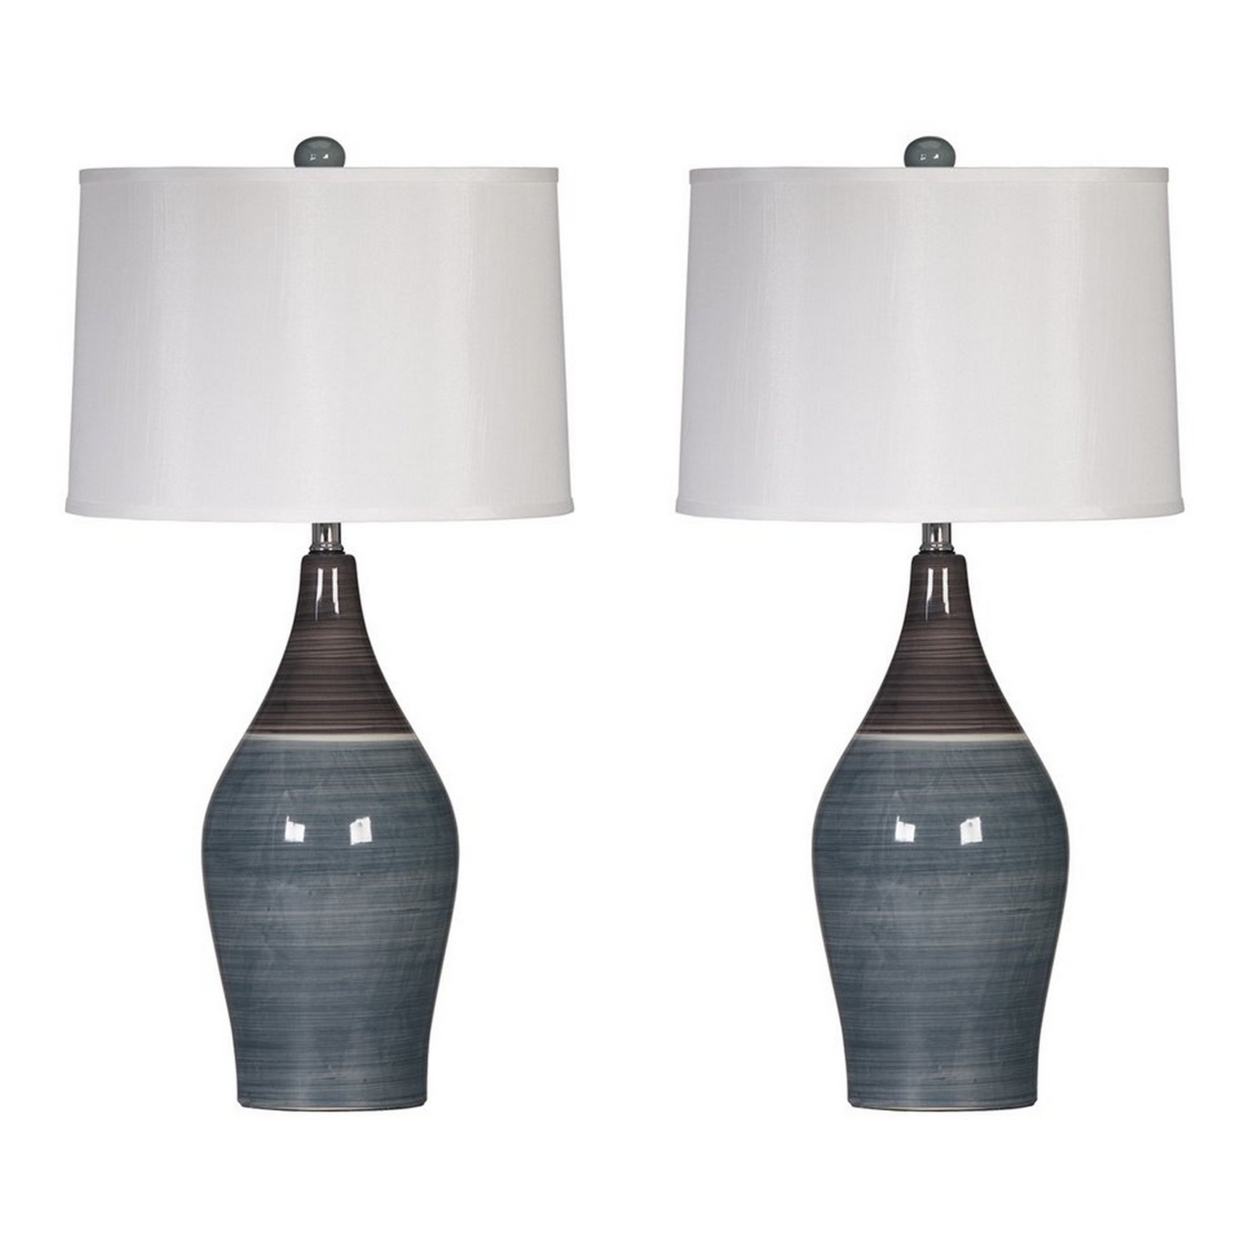 Pot Bellied Ceramic Table Lamp With Brushed Details,Set Of 2,Gray And White- Saltoro Sherpi